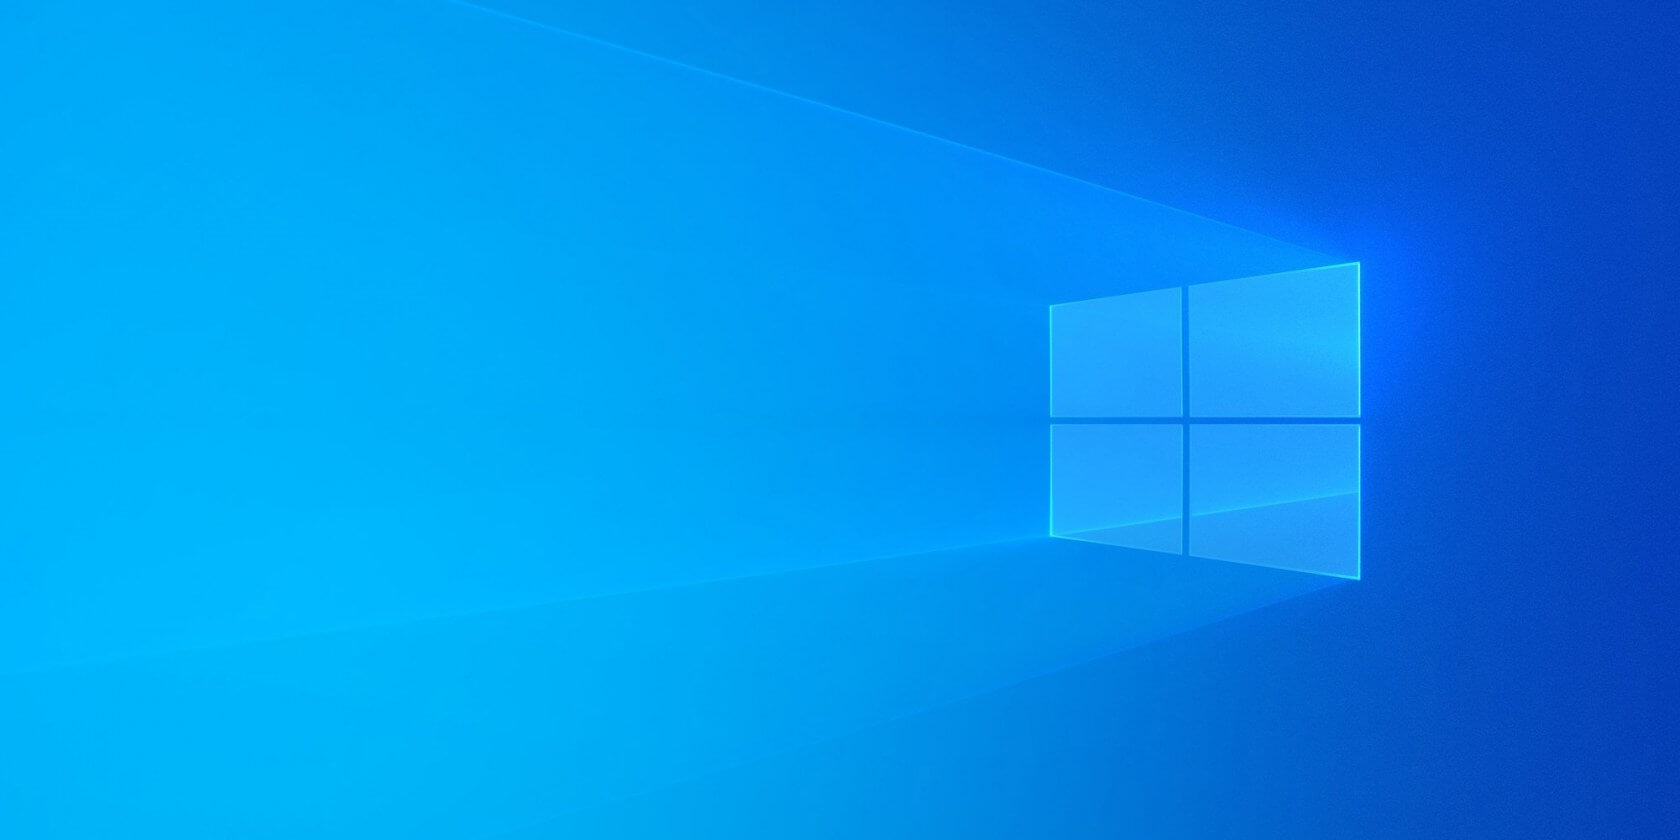 Microsoft adds 'variable refresh rate' setting to Windows 10 with version 1903